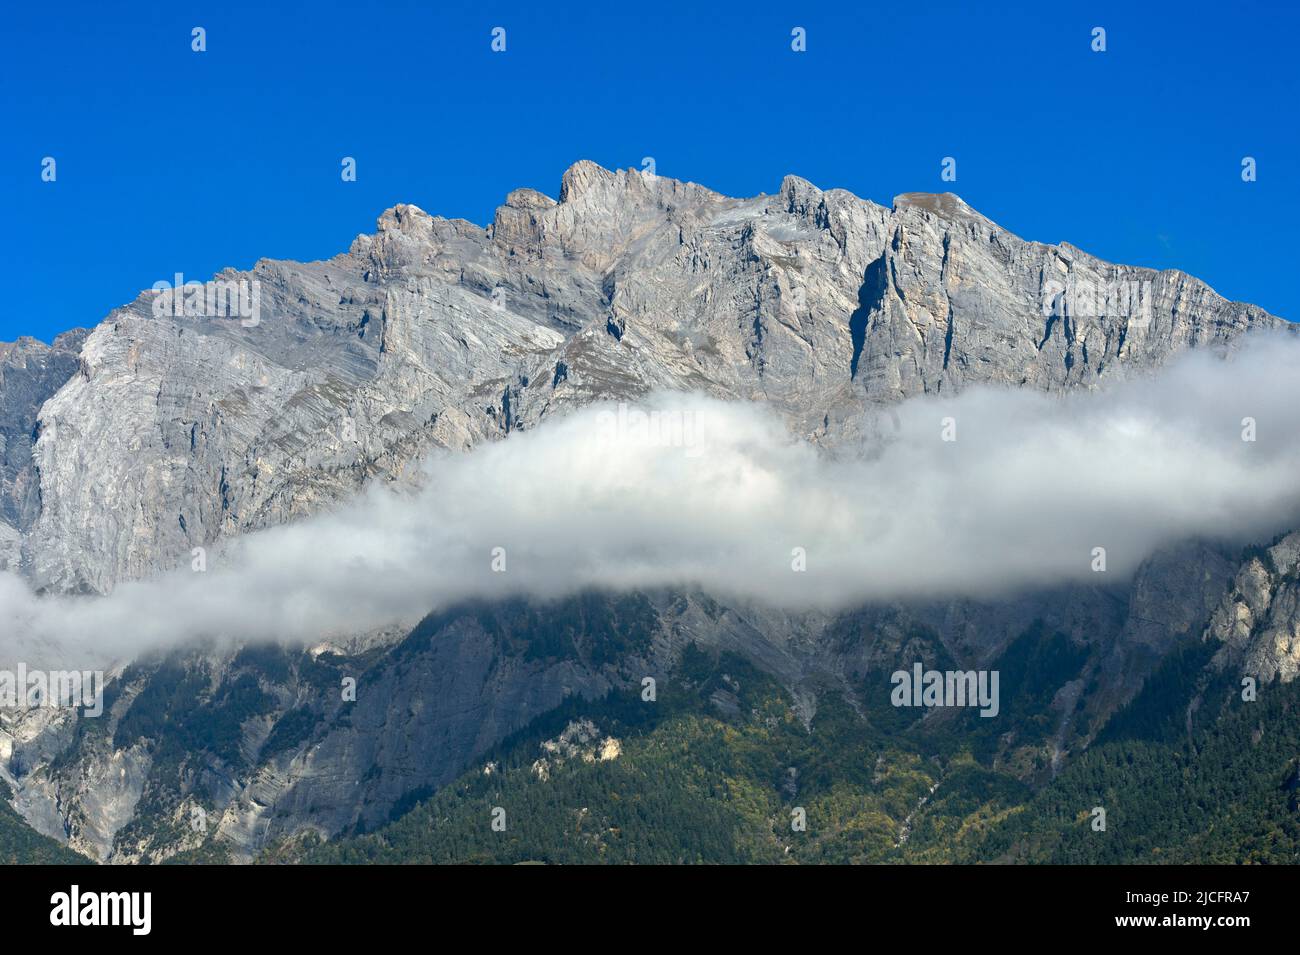 Cloud bank in front of the rugged mountain massif Haut de Cry, Chamoson, Valais, Switzerland Stock Photo